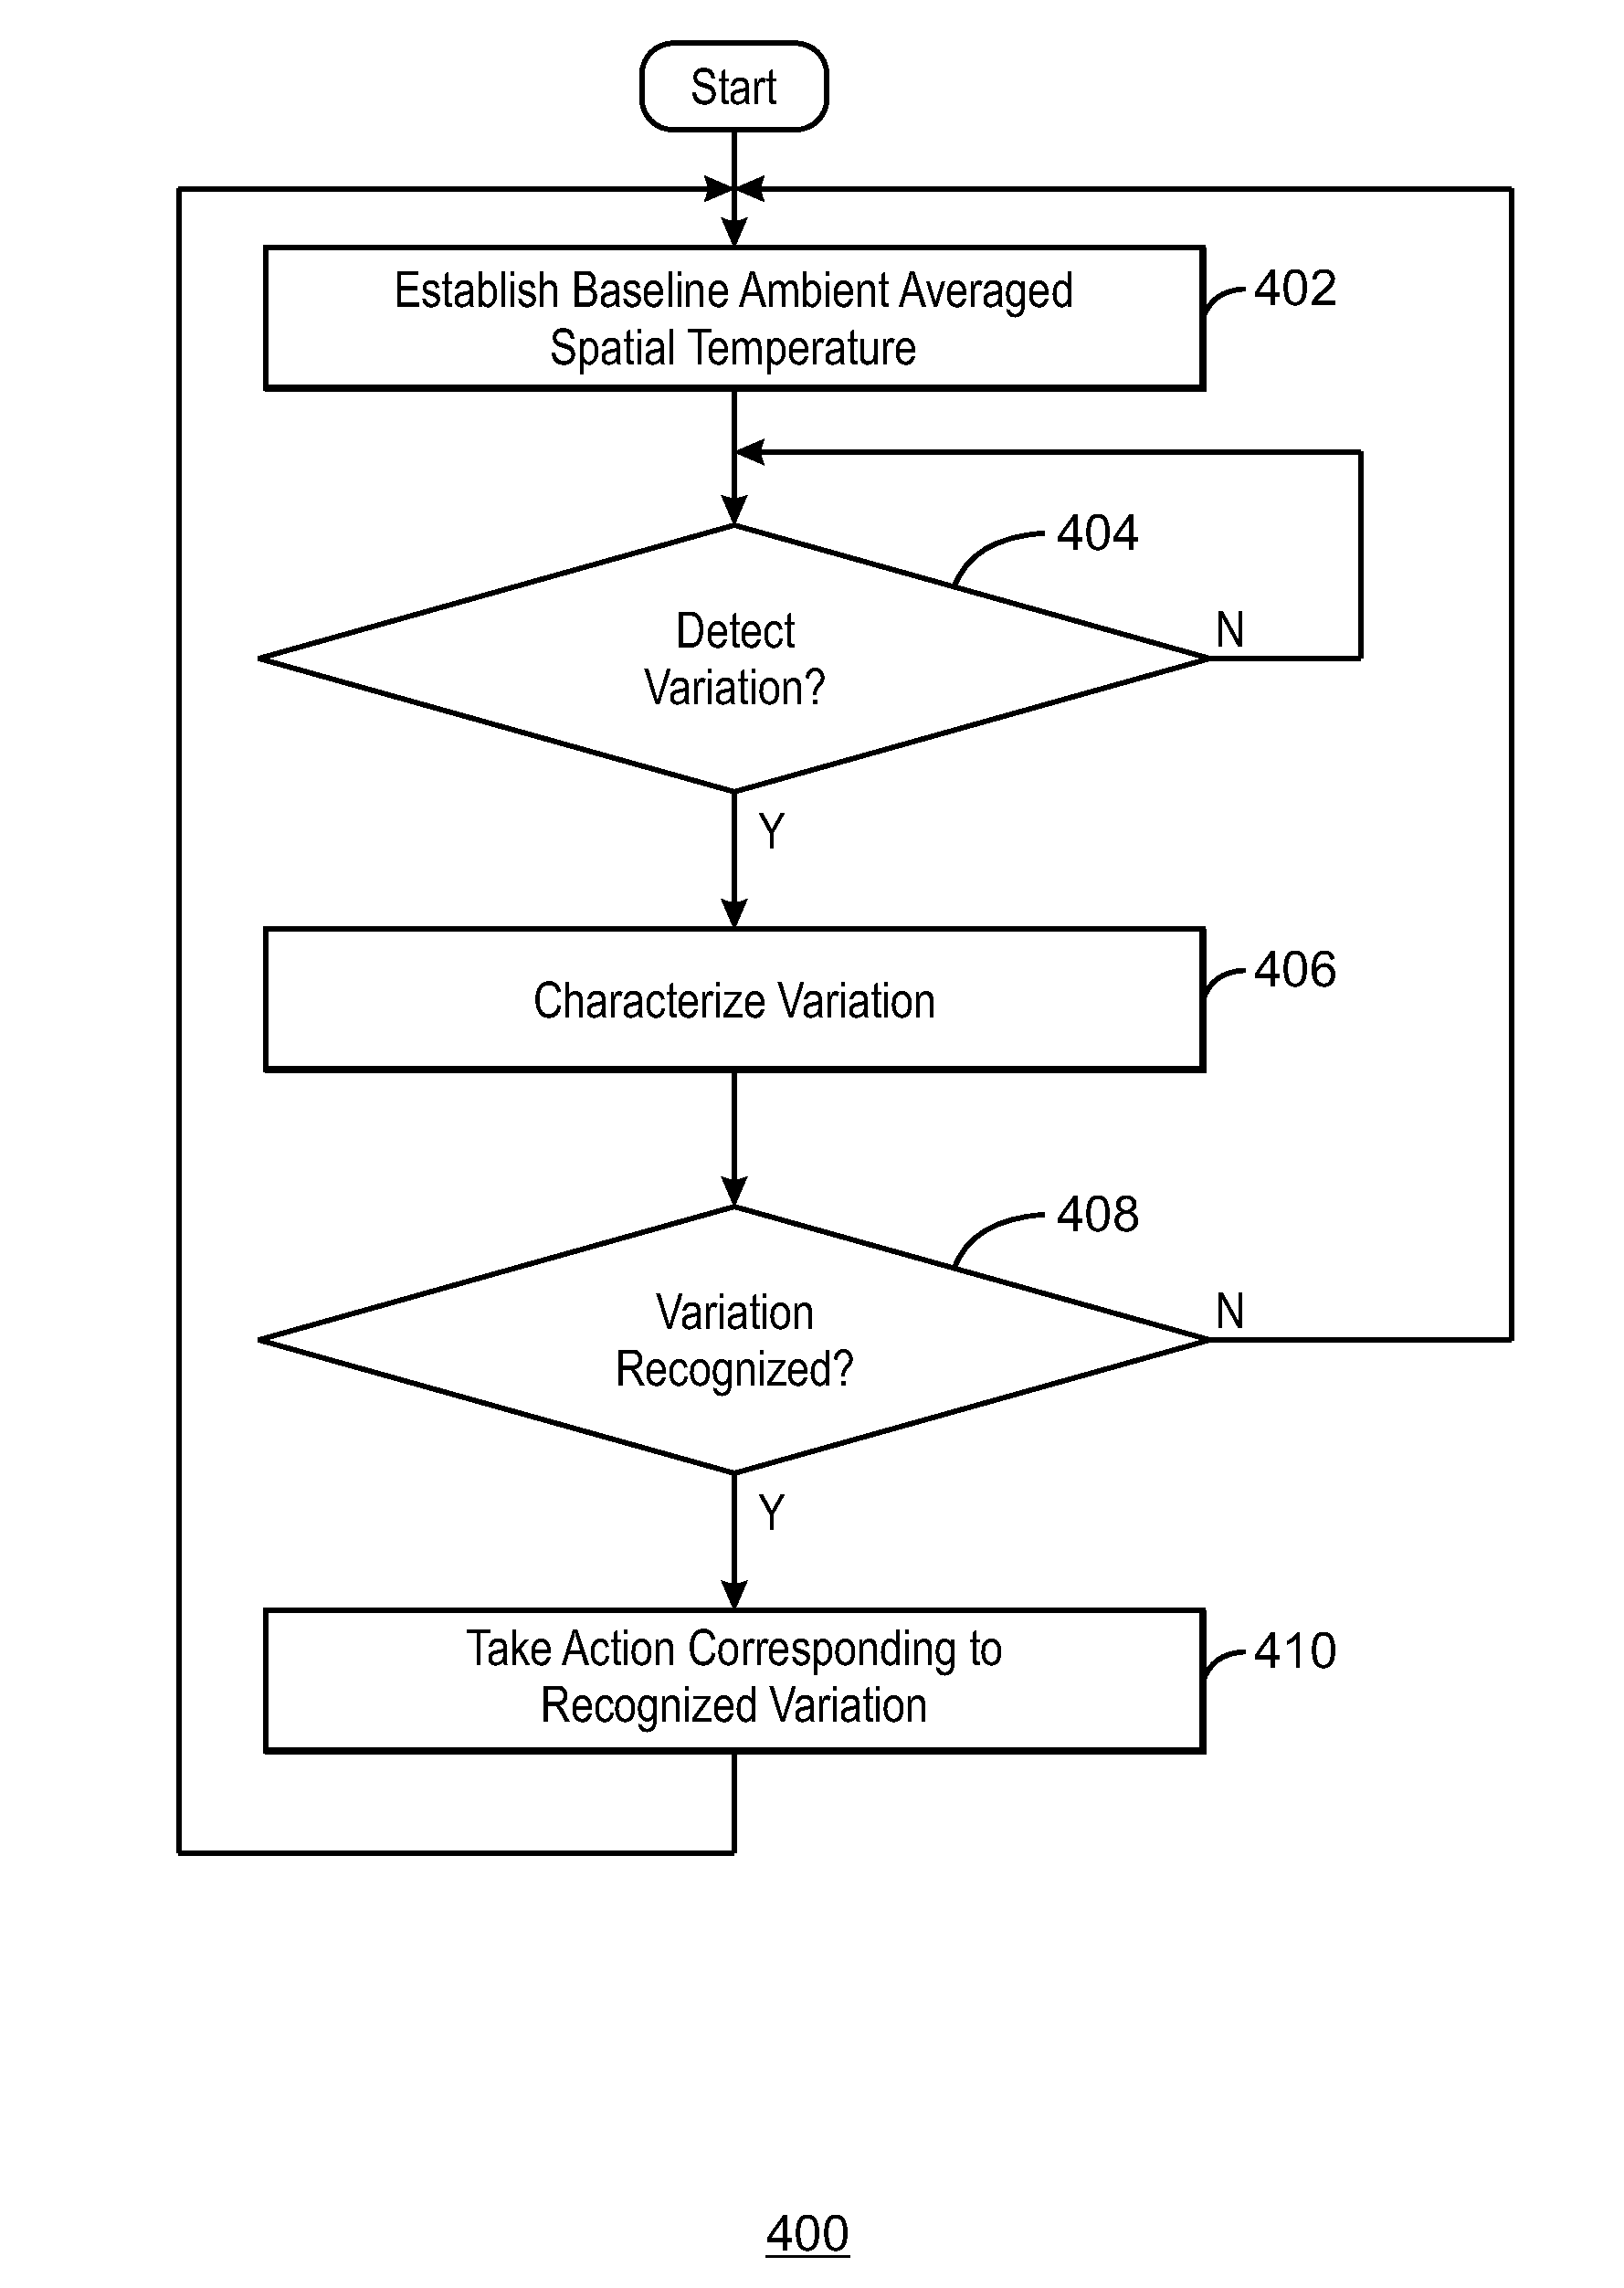 Method and apparatus for power management in an electronic device by sensing the presence and intent of an object